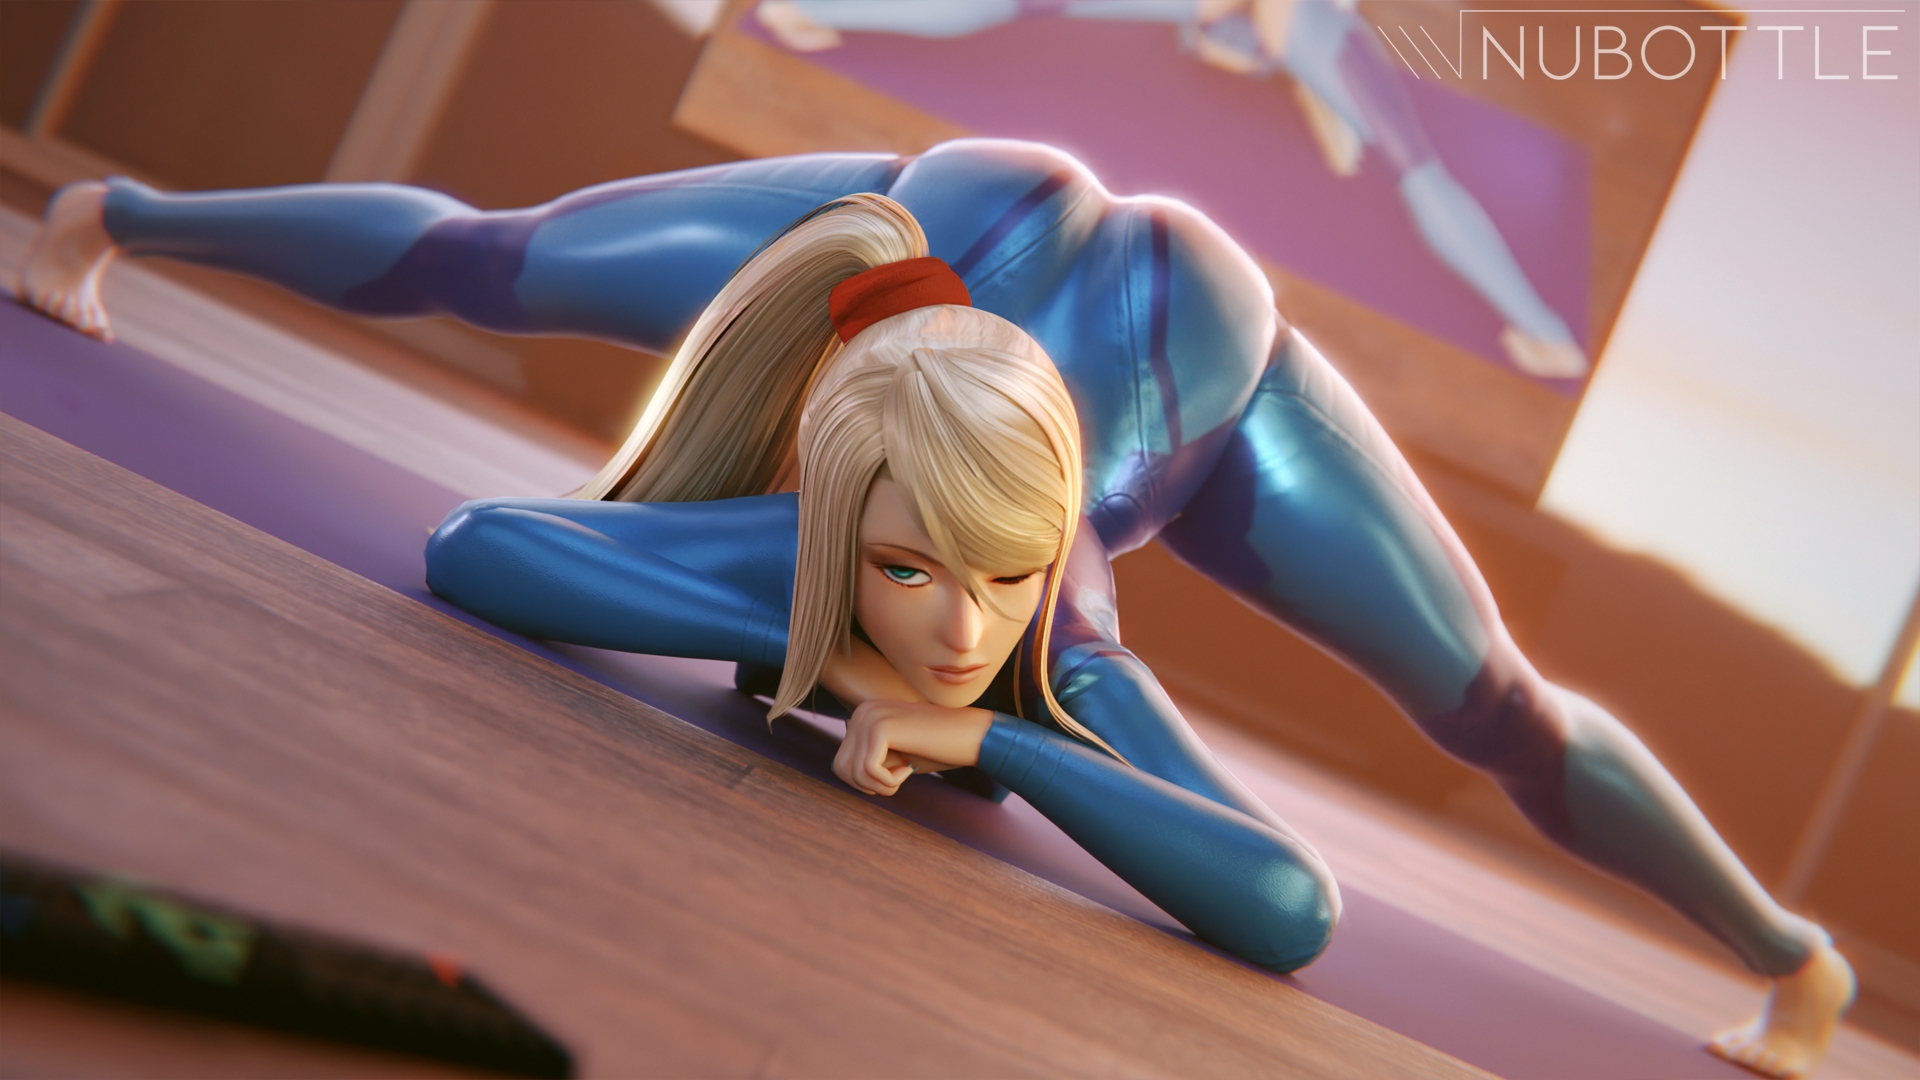 She's quite flexible huh? Samus Aran (Metroid) Metroid 3d Porn Nude Naked Alt Version Nature Pink Nipples Natural Boobs Natural Tits Doggy Style Spread Legs Ass Big Booty